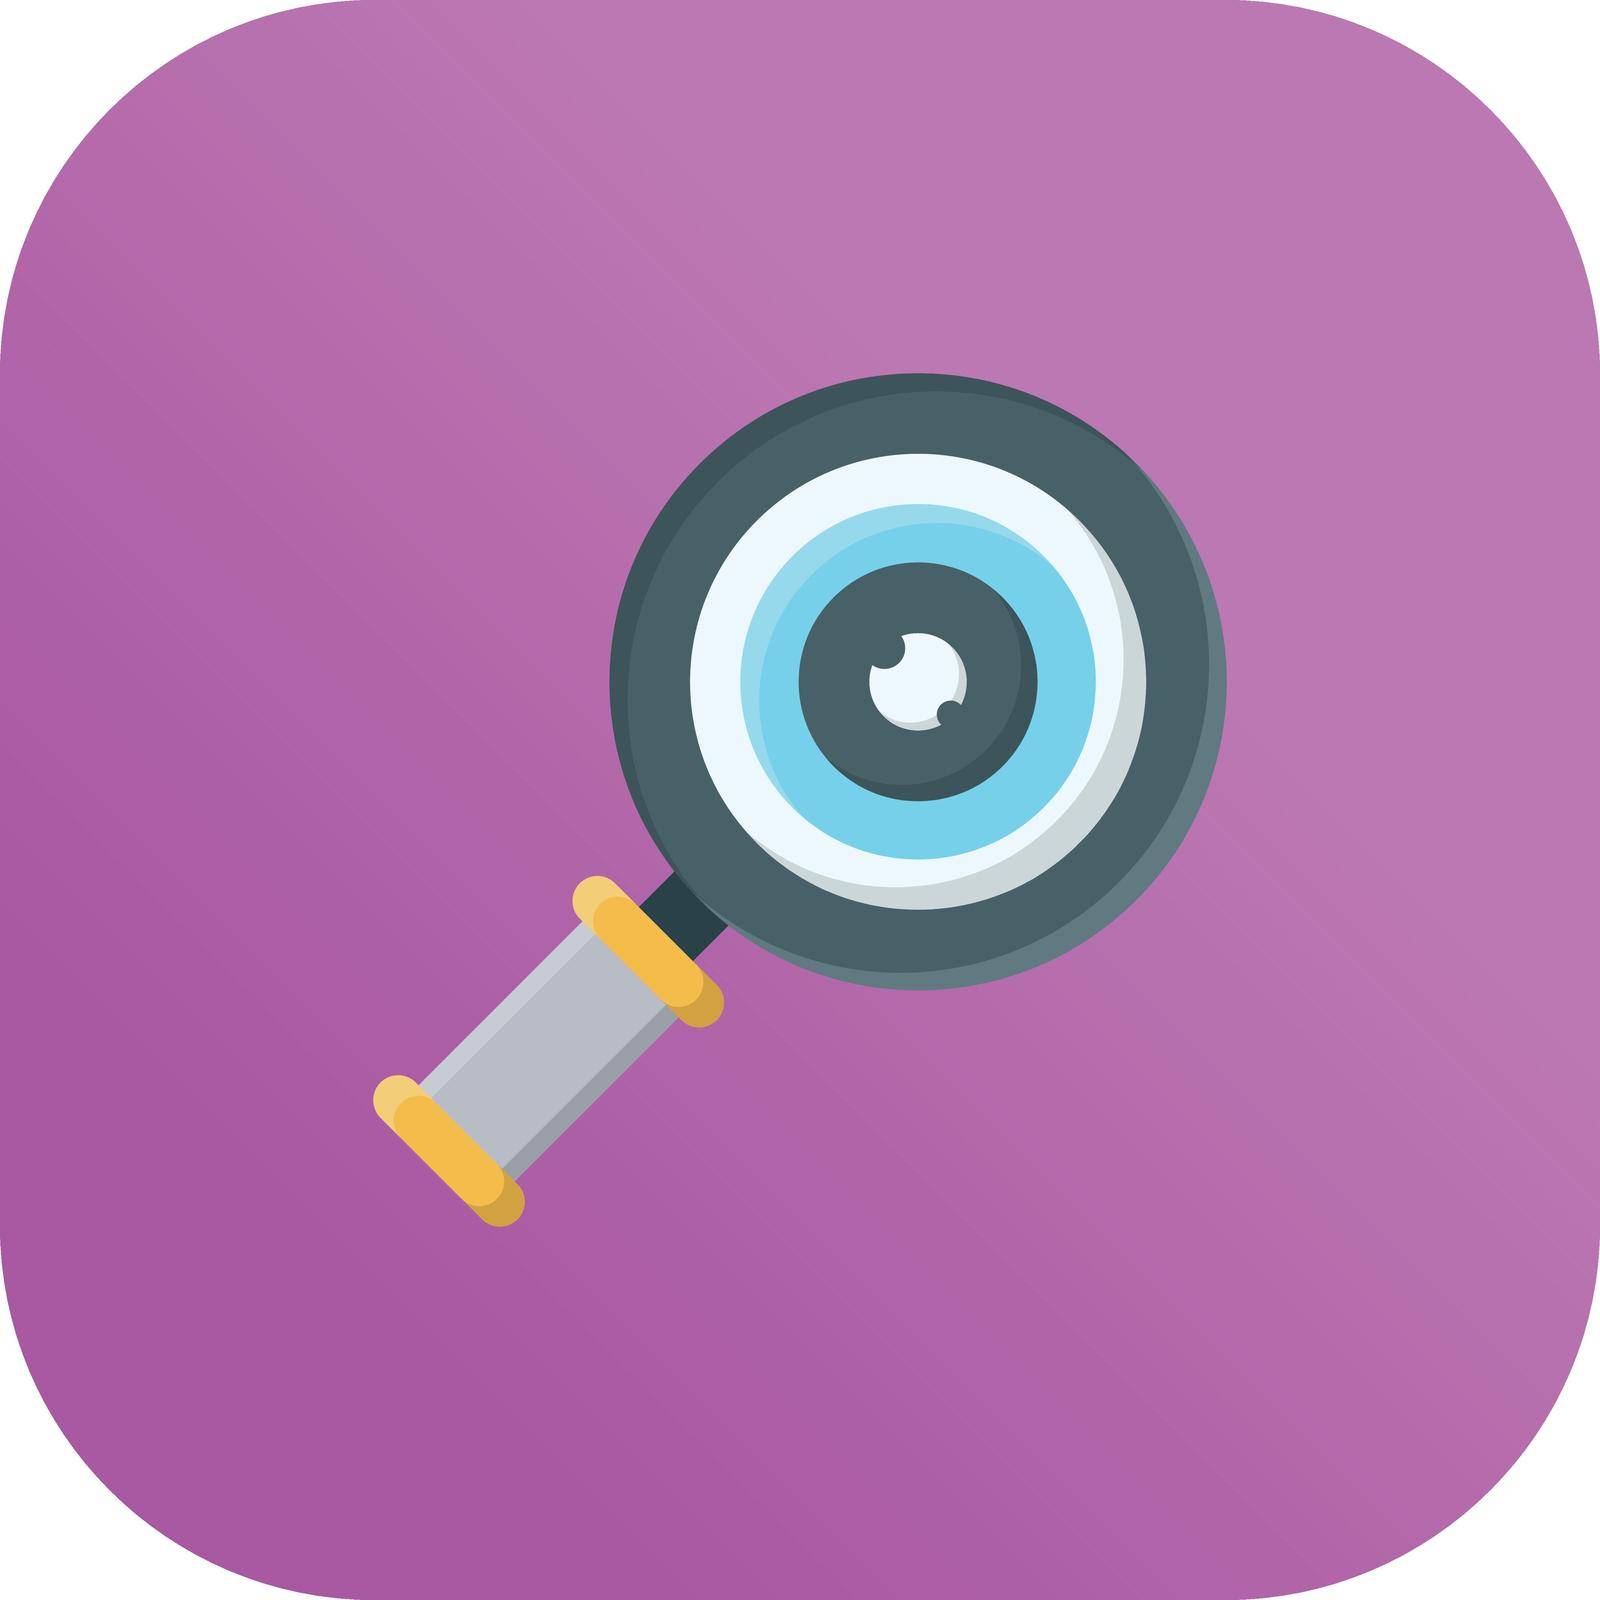 target by FlaticonsDesign